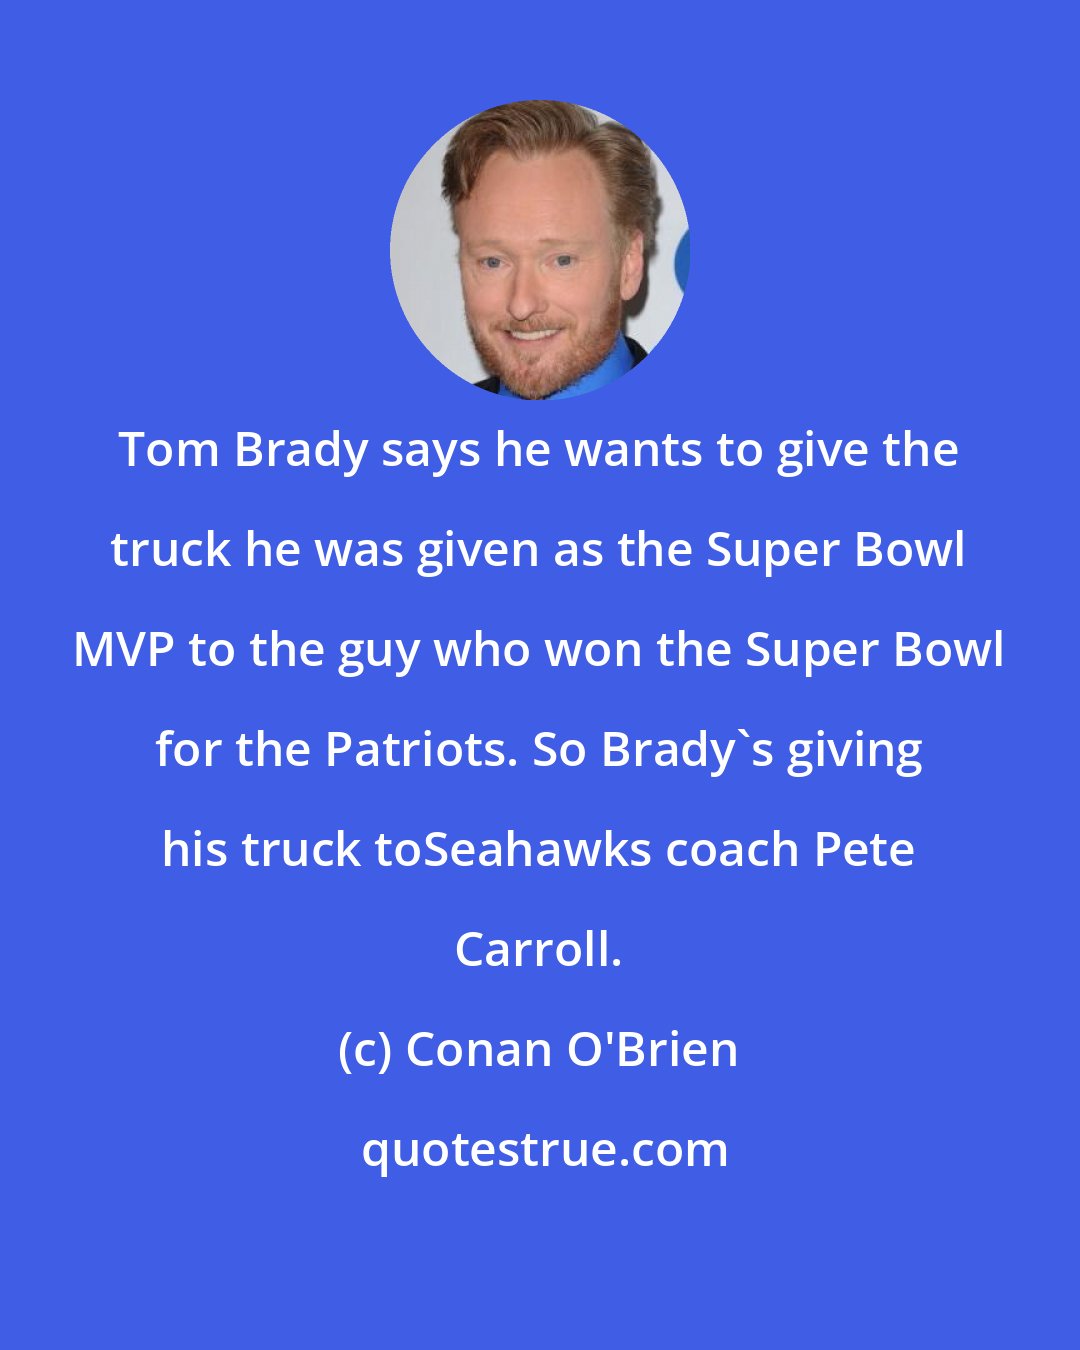 Conan O'Brien: Tom Brady says he wants to give the truck he was given as the Super Bowl MVP to the guy who won the Super Bowl for the Patriots. So Brady's giving his truck toSeahawks coach Pete Carroll.